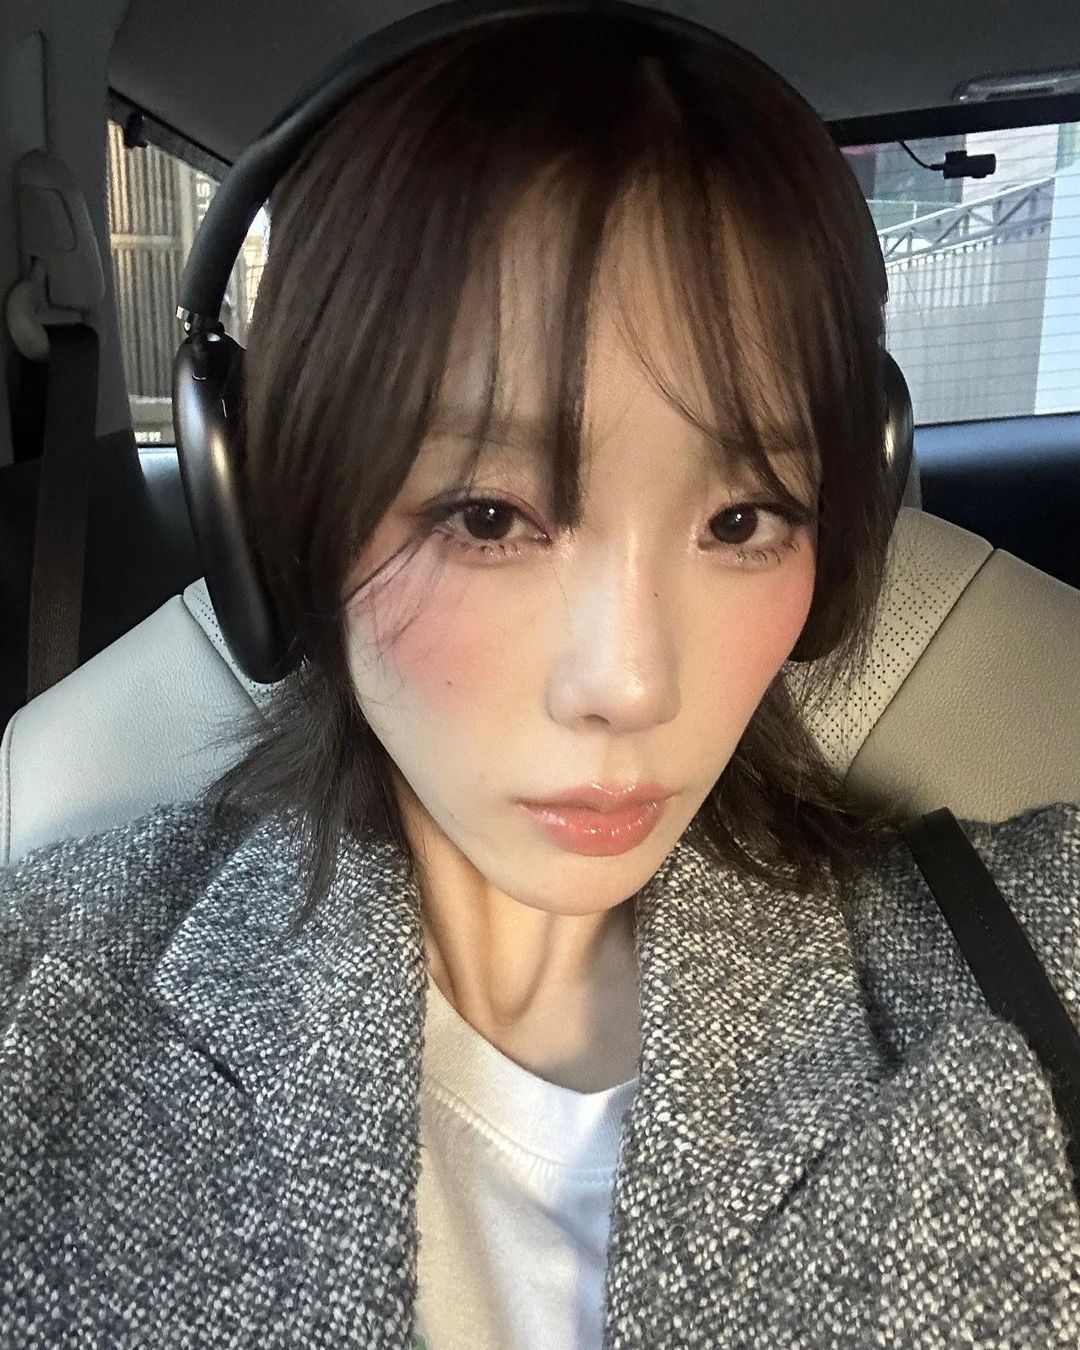 Taeyeon, a drawn face... Running backwards alone in the fattening fall